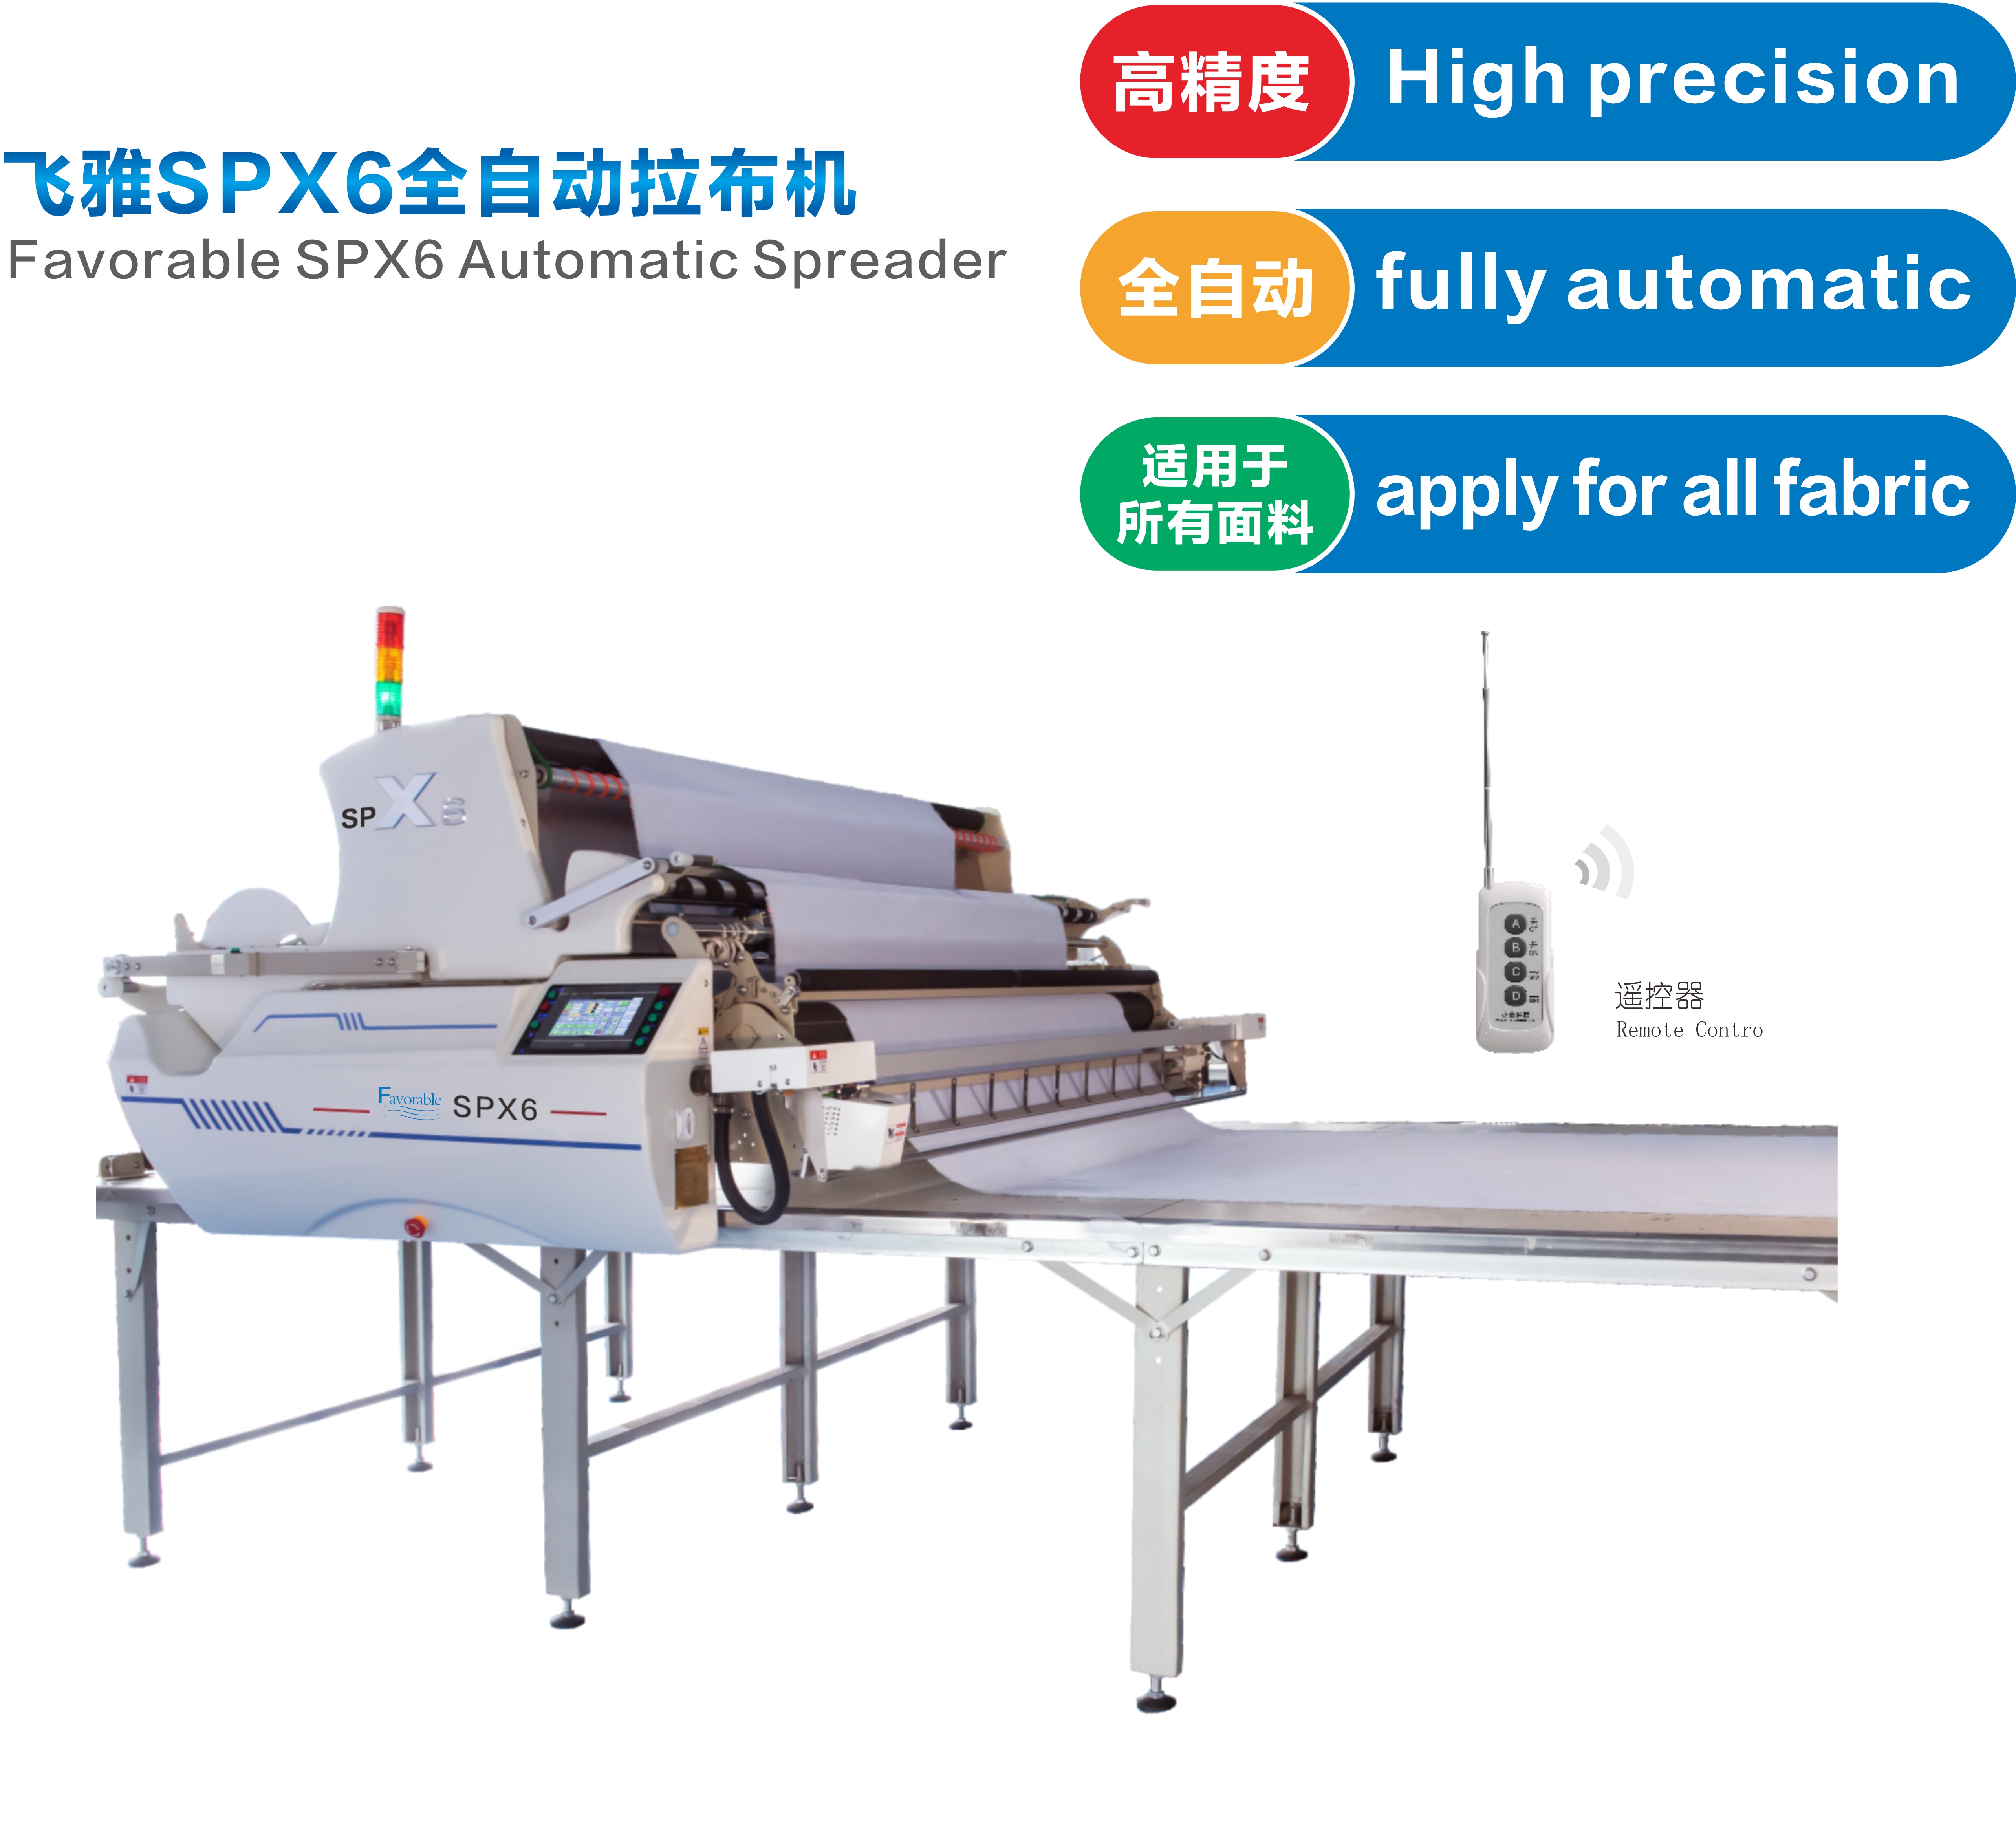 Favorable Automatic SPX6 Spreader Machine High precision Fully automatic Applied for all fabric